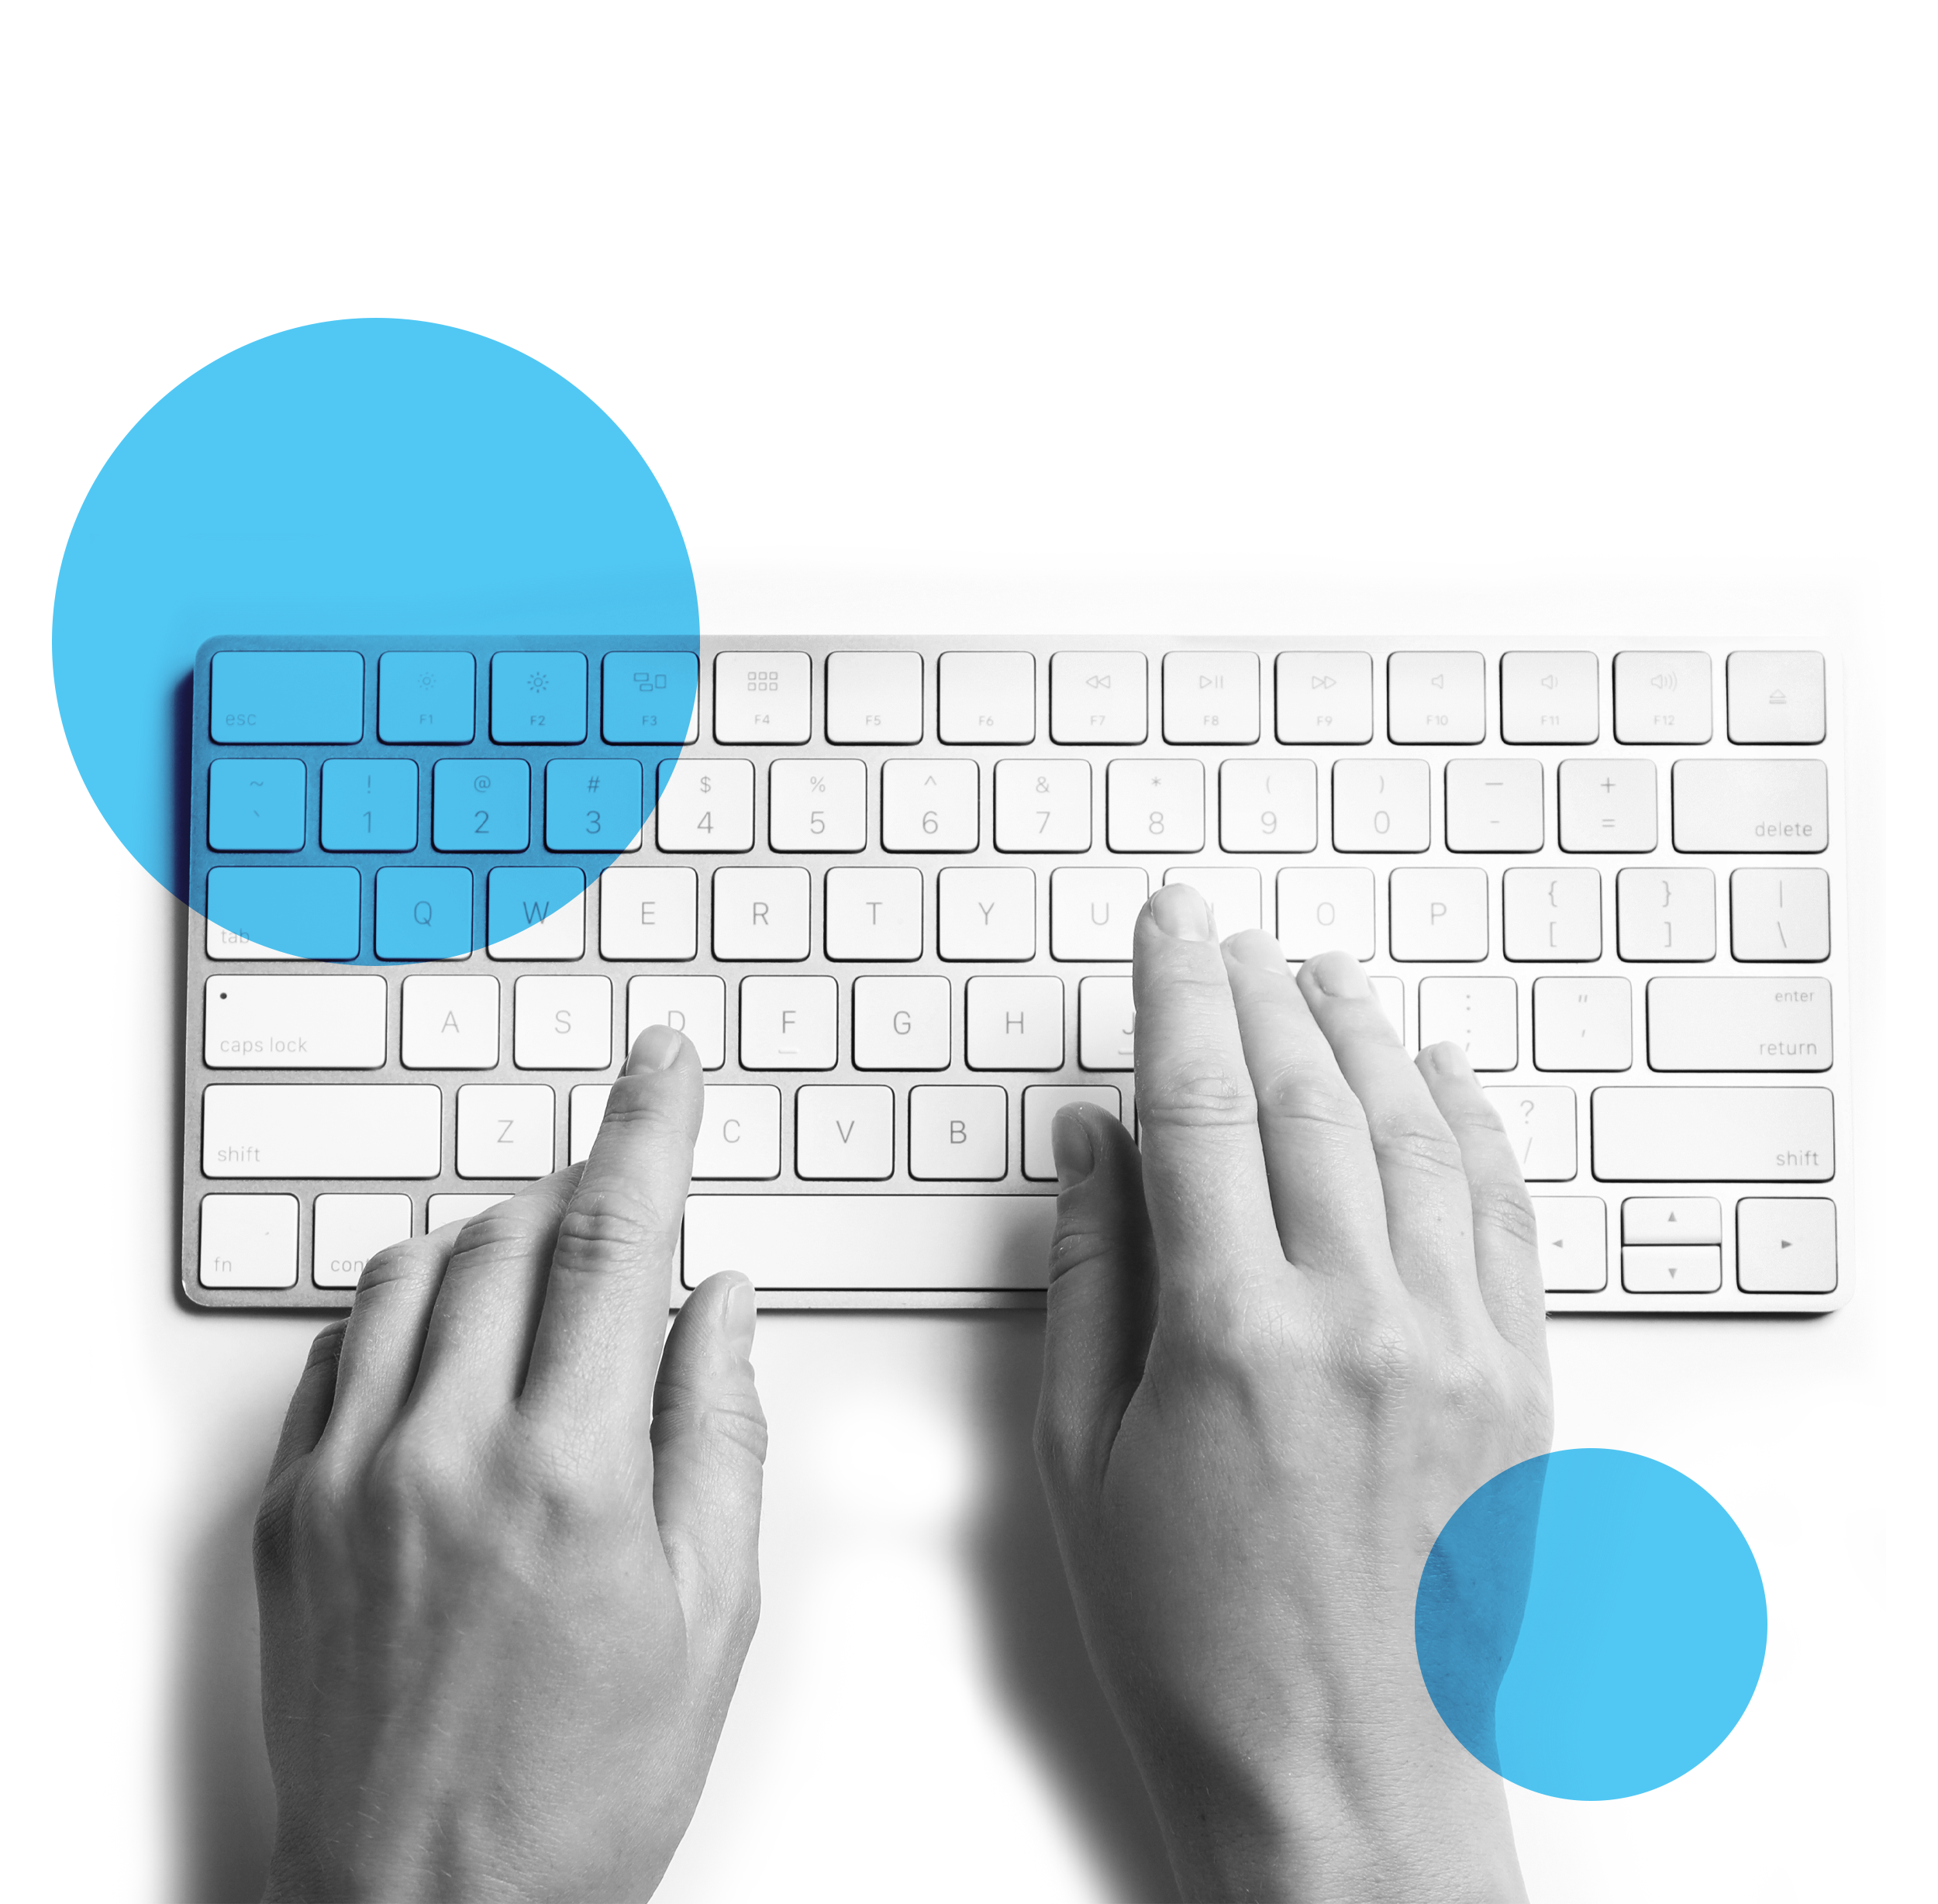 Cutout black and white image of hands typing on a keyboard with blue circles layered over